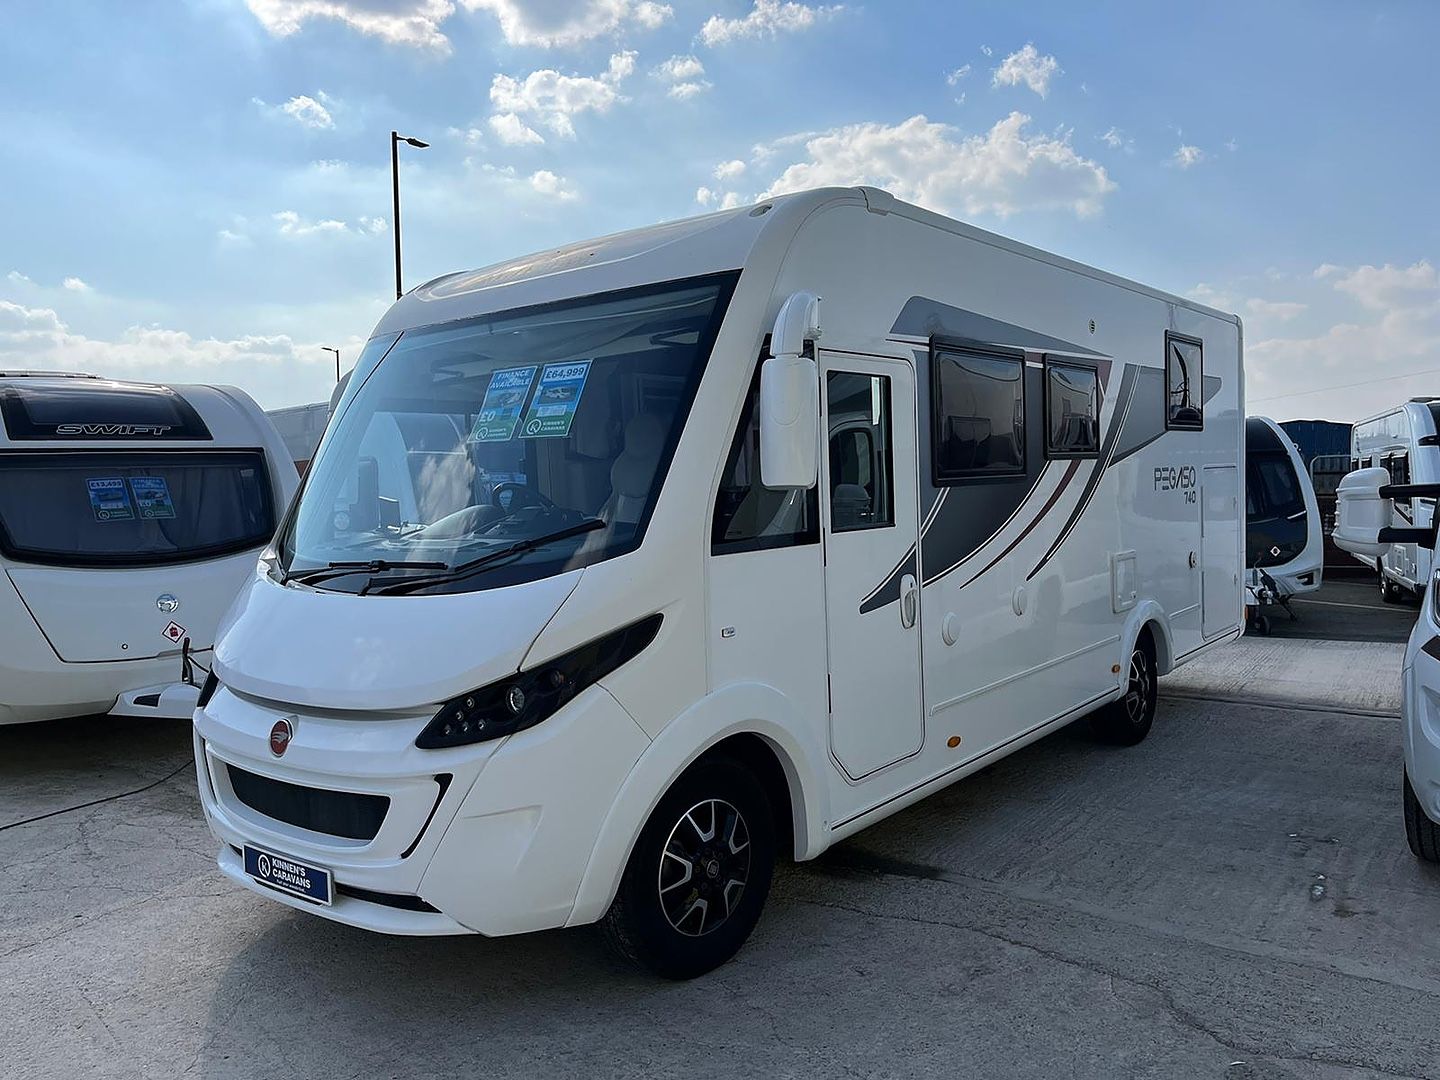 A Class Roller TeamPegaso 740Motor Home for sale